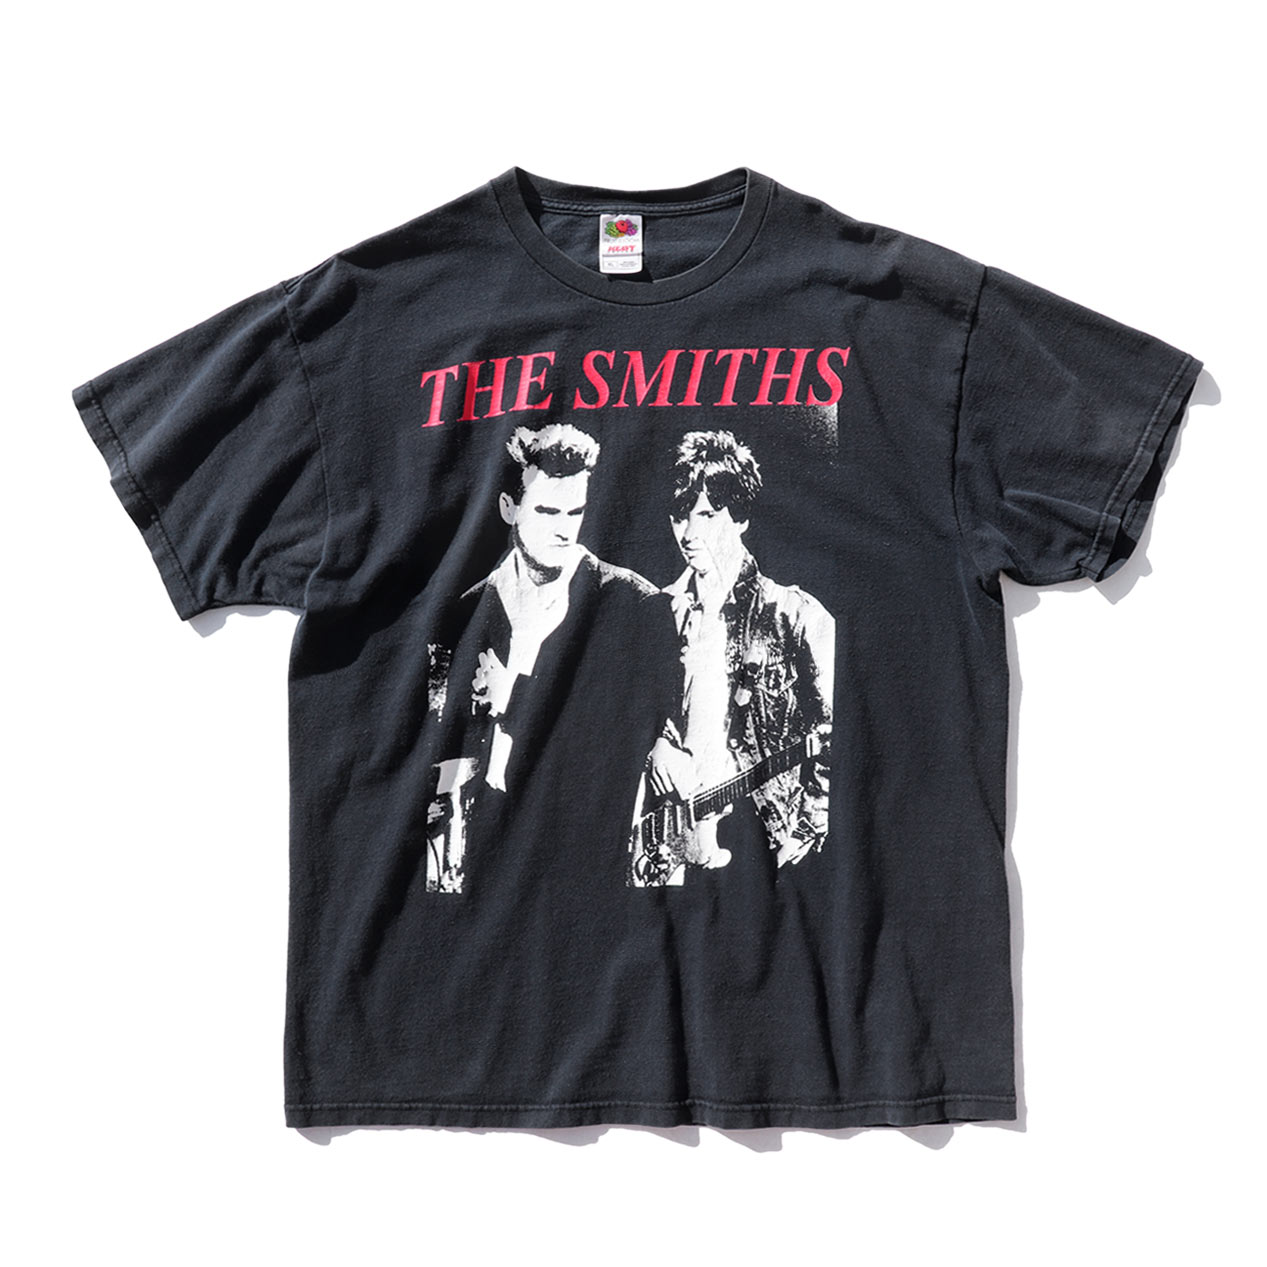 POST JUNK / 00's THE SMITHS “JOHNNY MARR AND MORRISSEY” T-Shirt [XL]